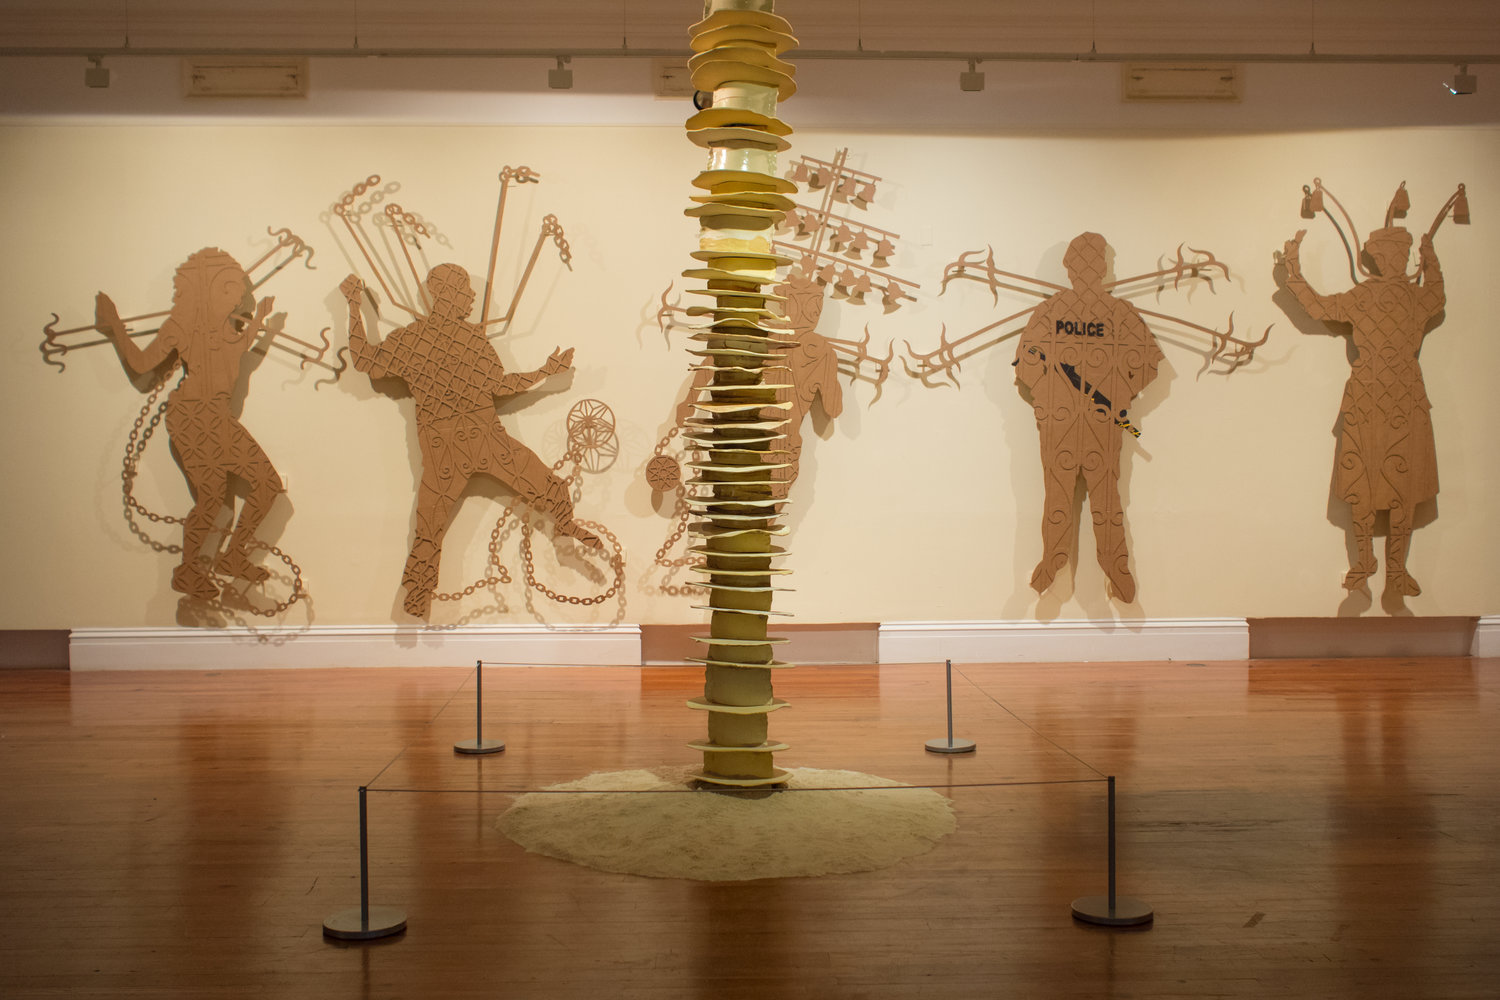 Brown figures are in high relief against the wall, each with items surrounding them. At the center are the layers of a pillar.